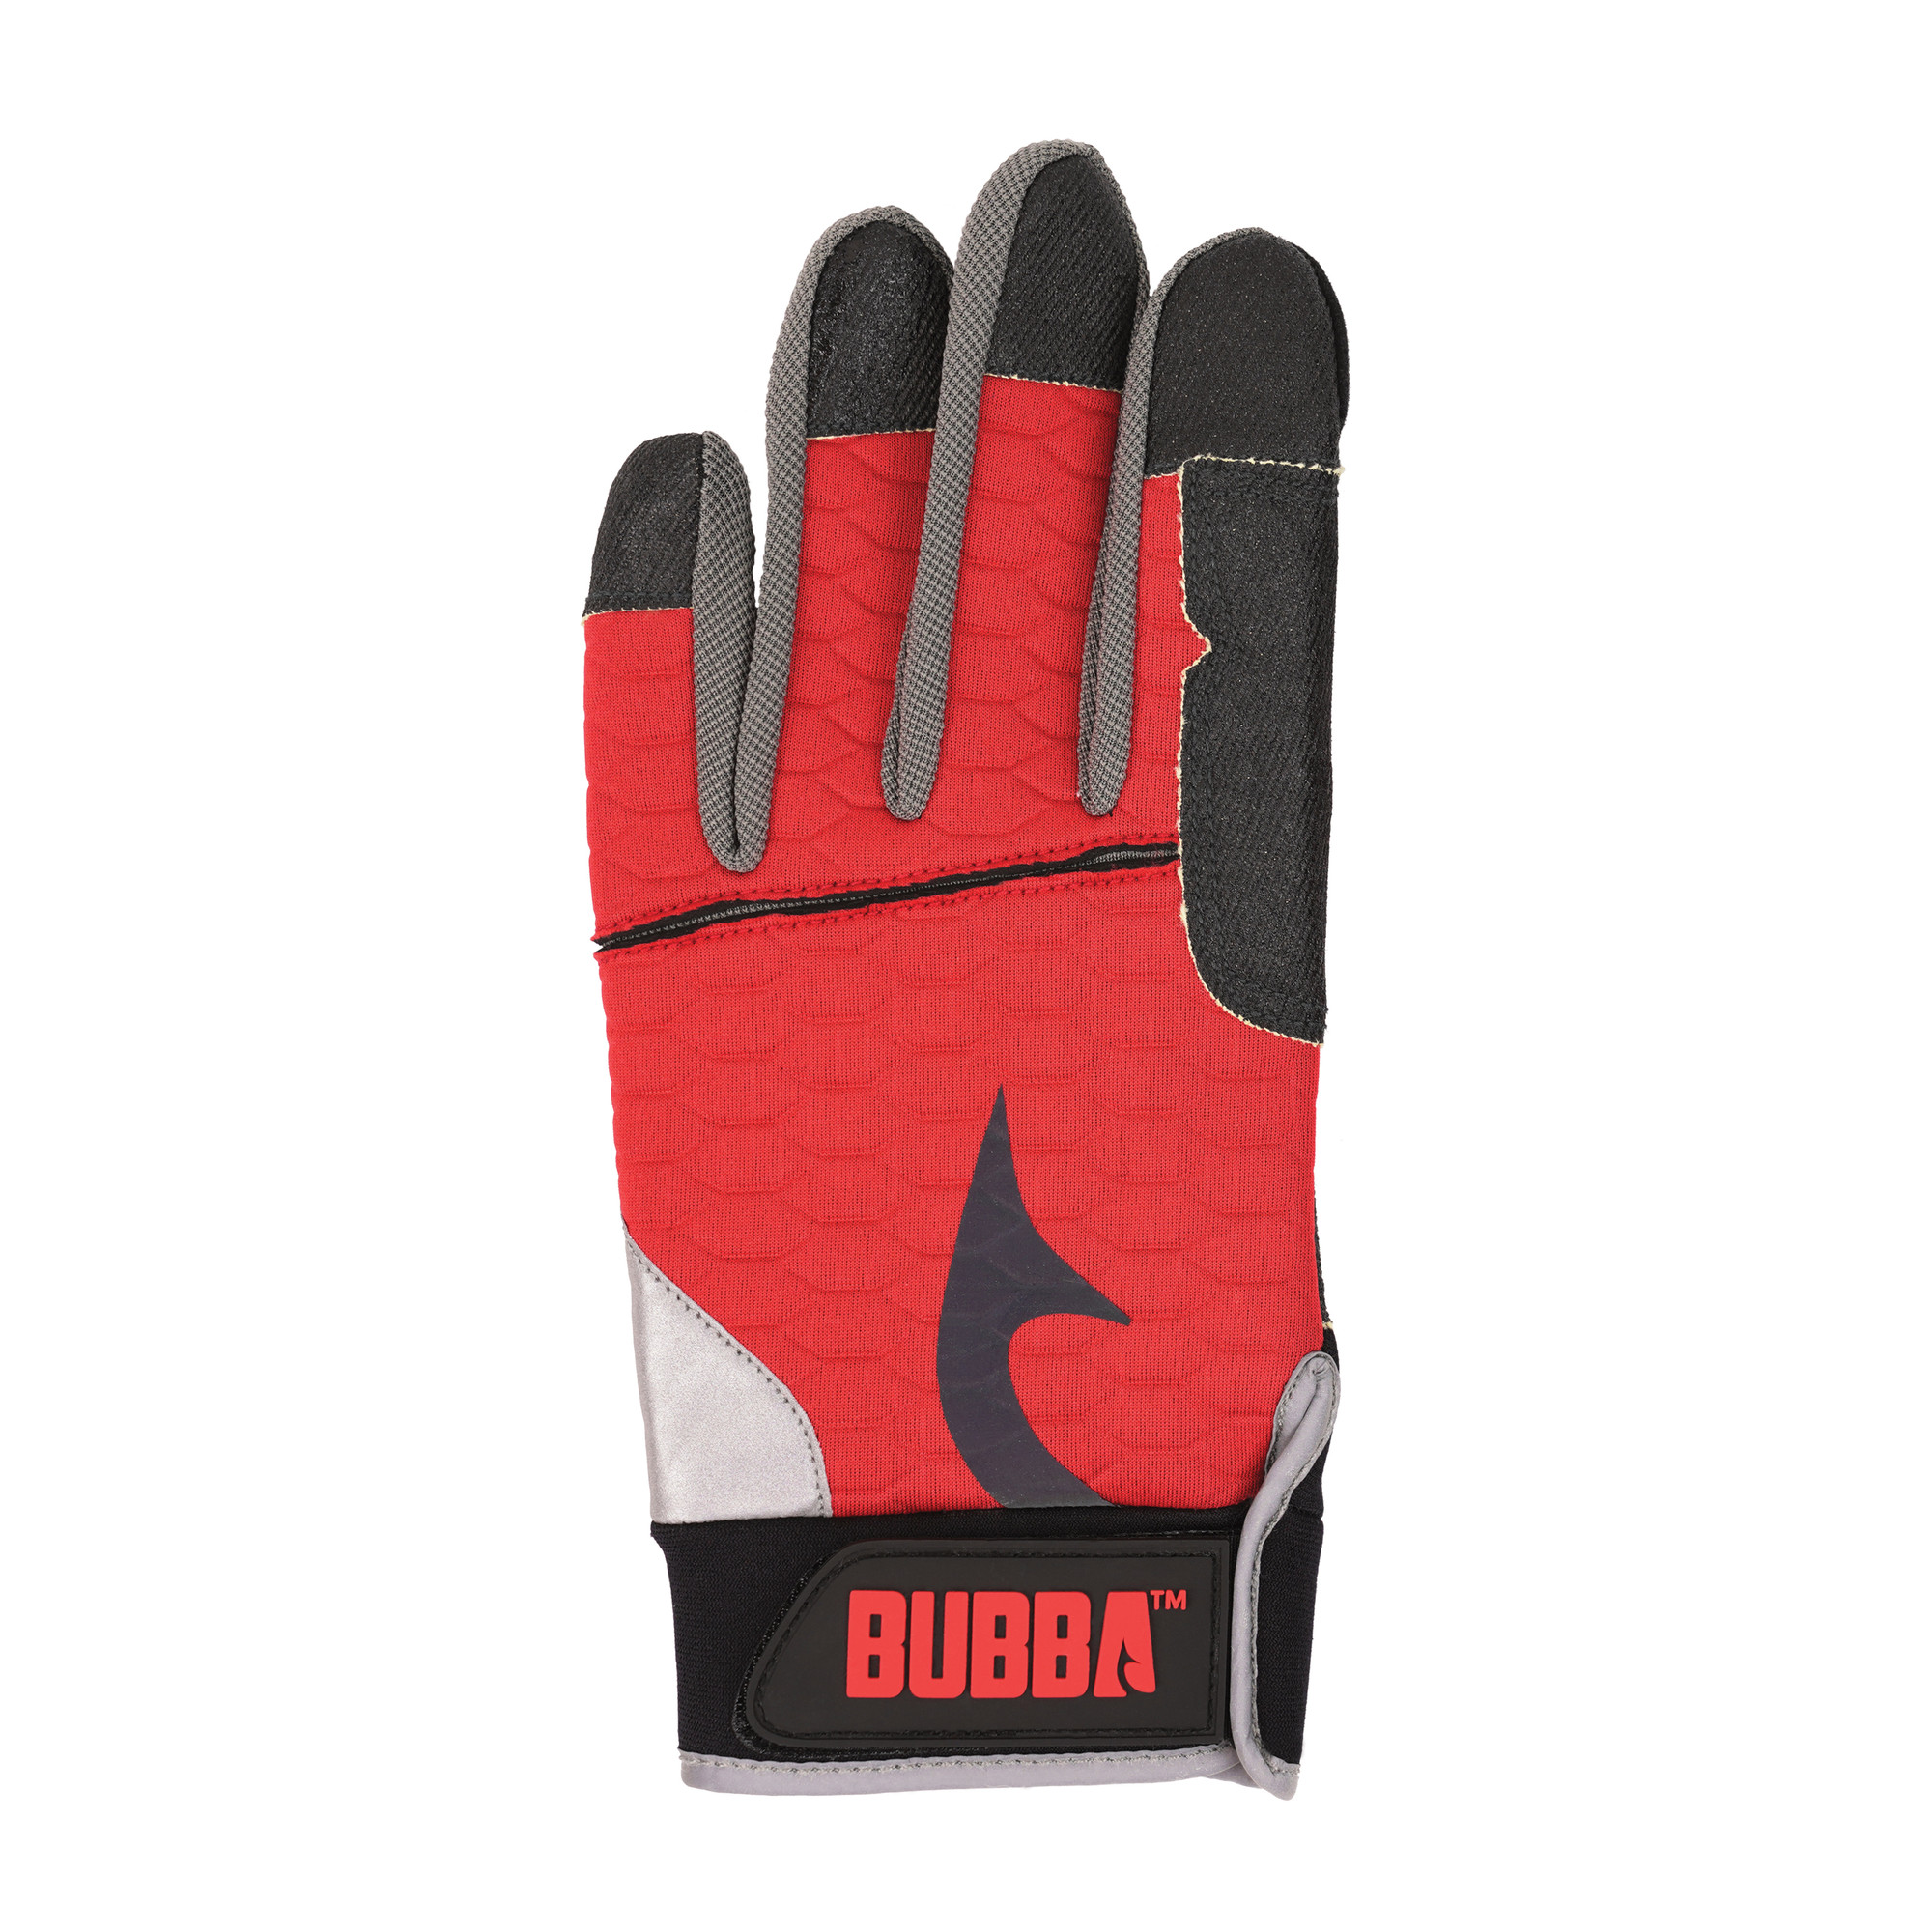 BUBBA BLADE FILLET GLOVES LARGE W/RED NON SLIP GRIP